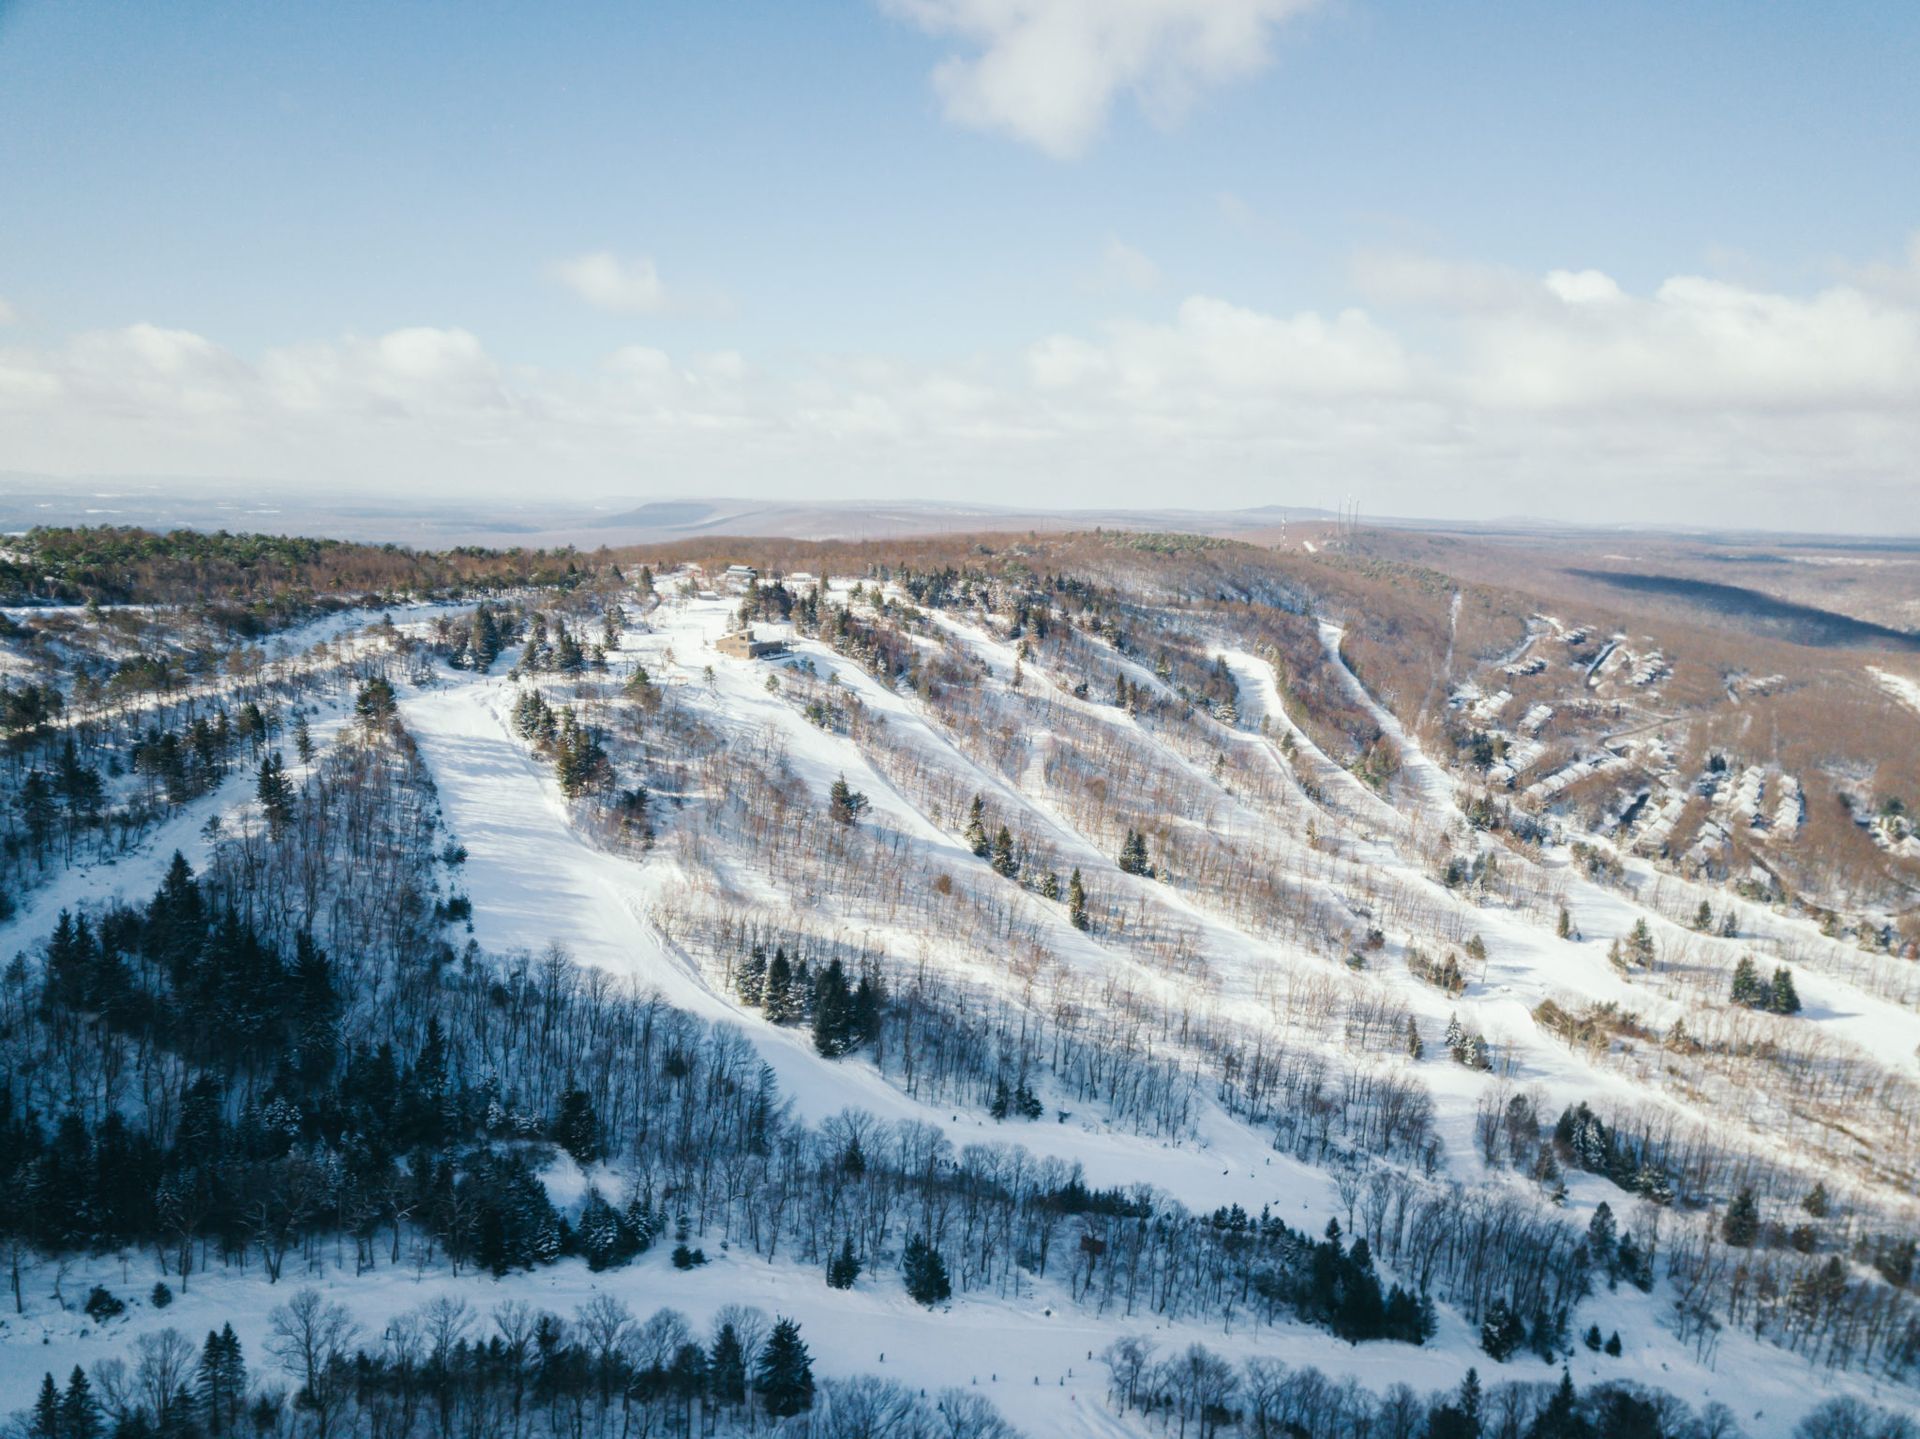 Camelback Ski Resort in the Pocono Mountains near Chestnuthill Countryside Manor